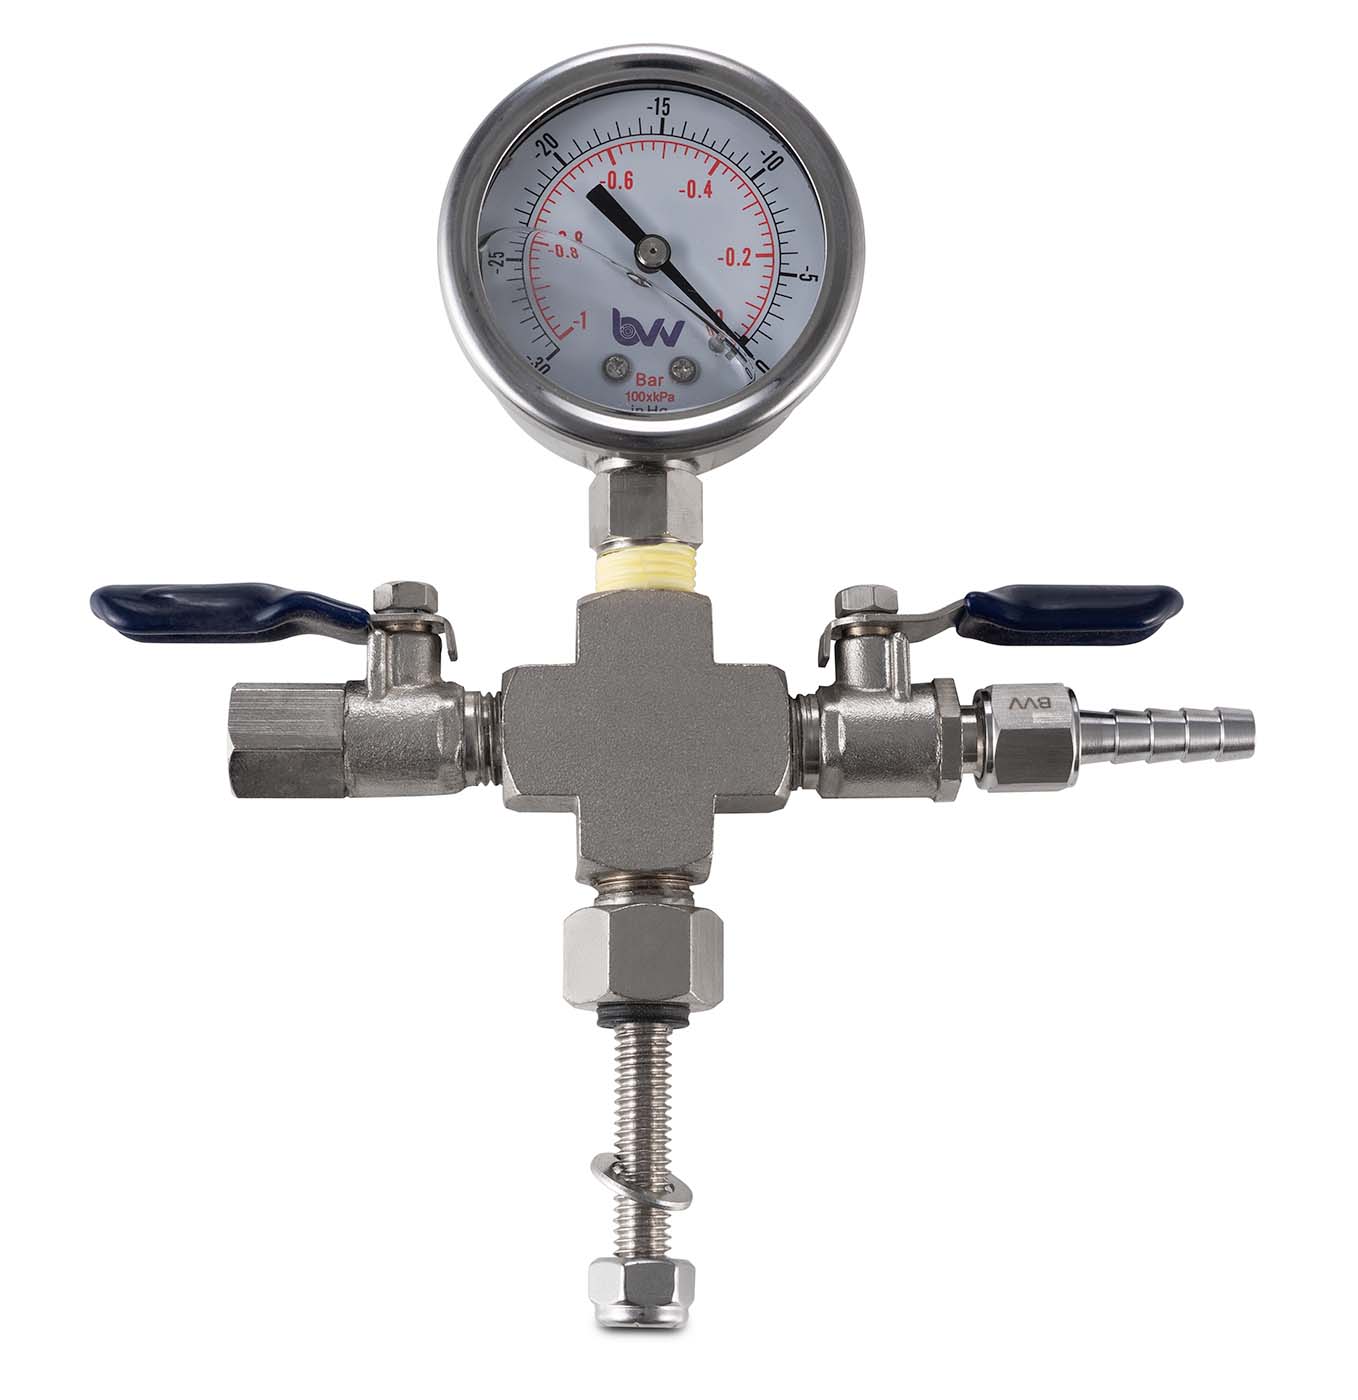 Valve Manifold - Cross with Hose Barb and Vacuum Gauge Questions & Answers